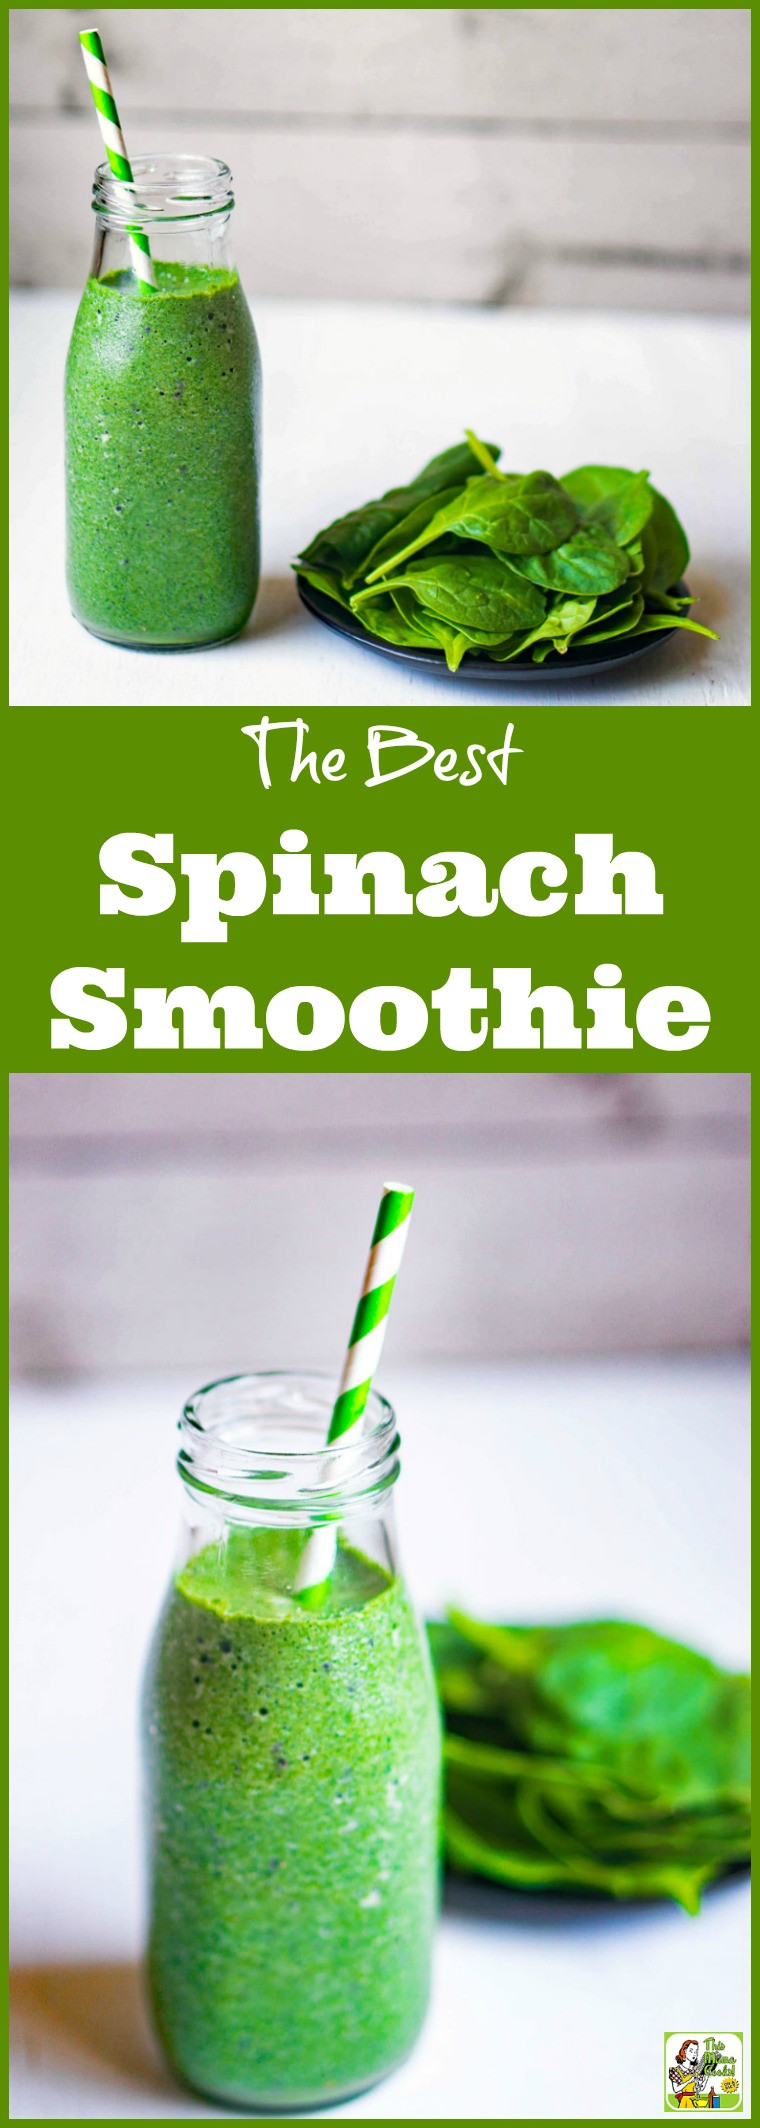 Diet Smoothie Recipes
 How to Make the Best Spinach Smoothie Recipes